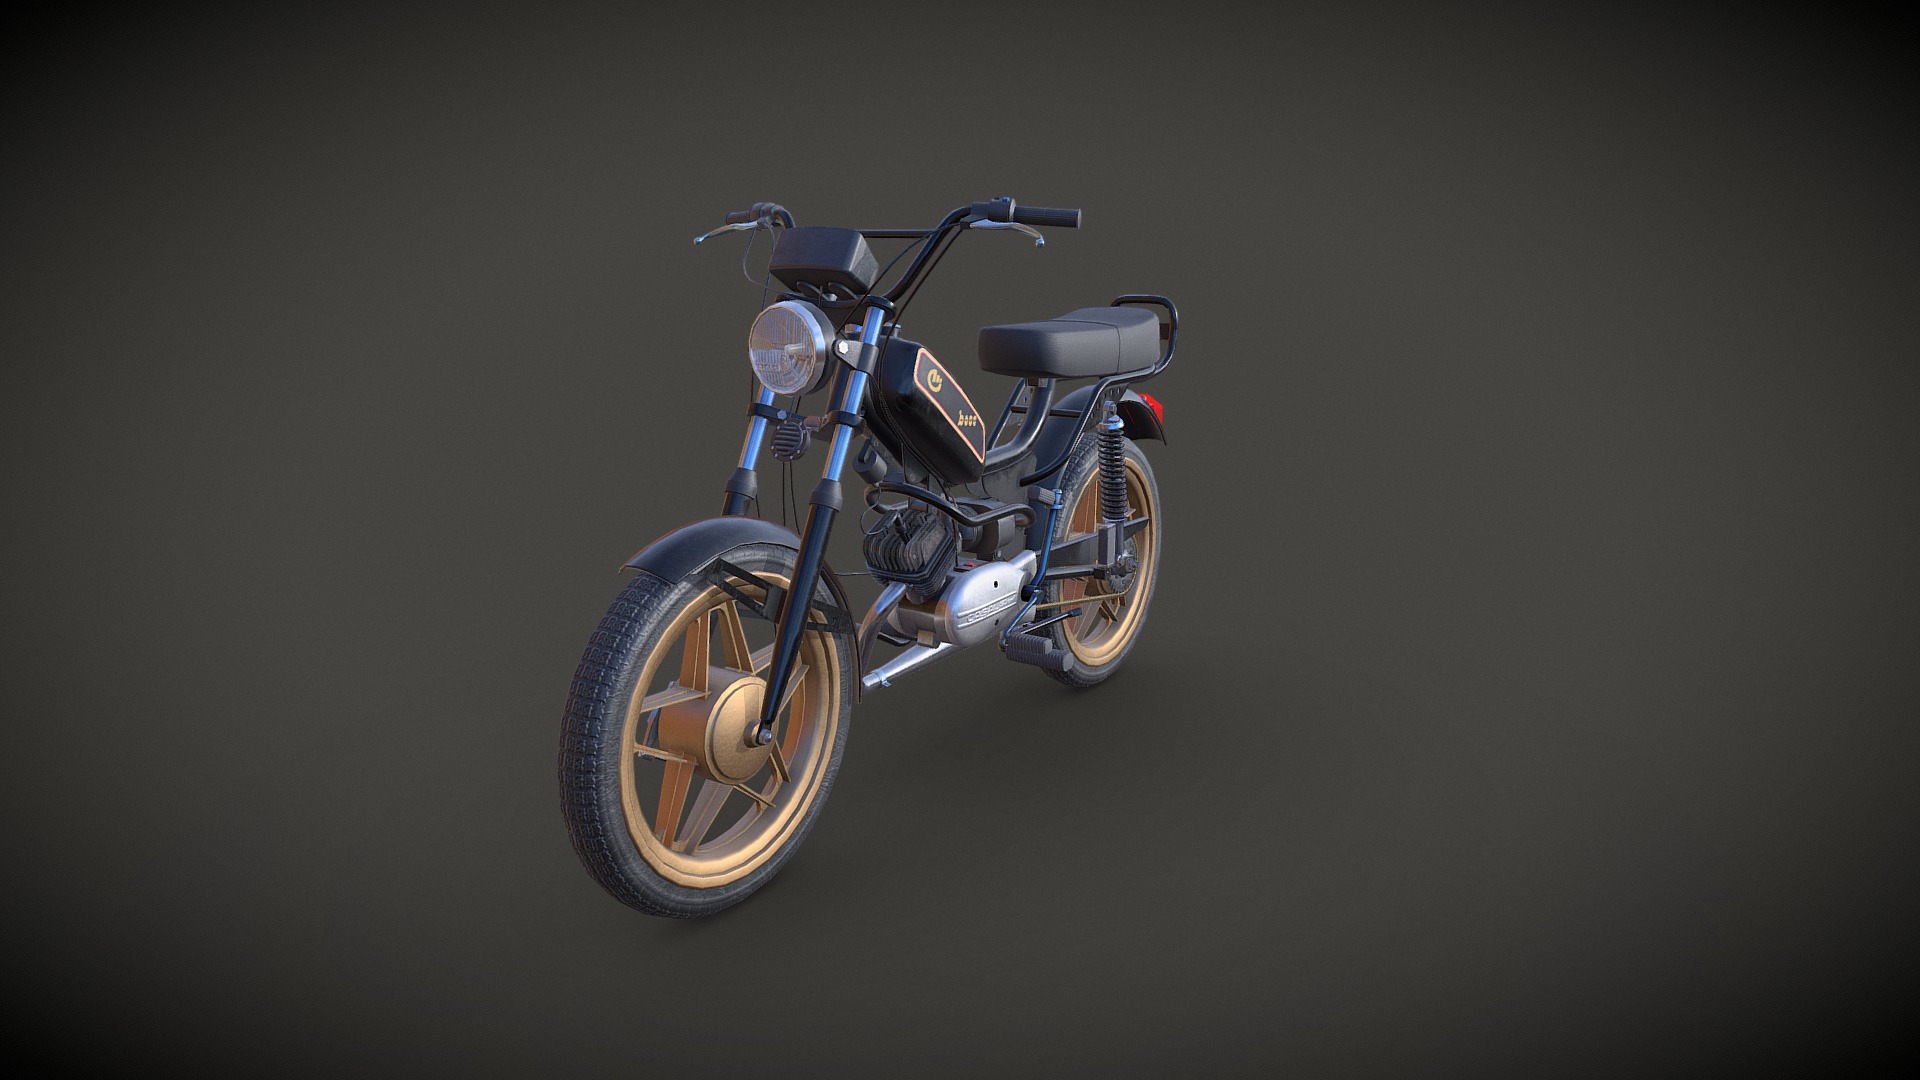 3D model Casal Boss - This is a 3D model of the Casal Boss. The 3D model is about a motorcycle parked on a grey background.